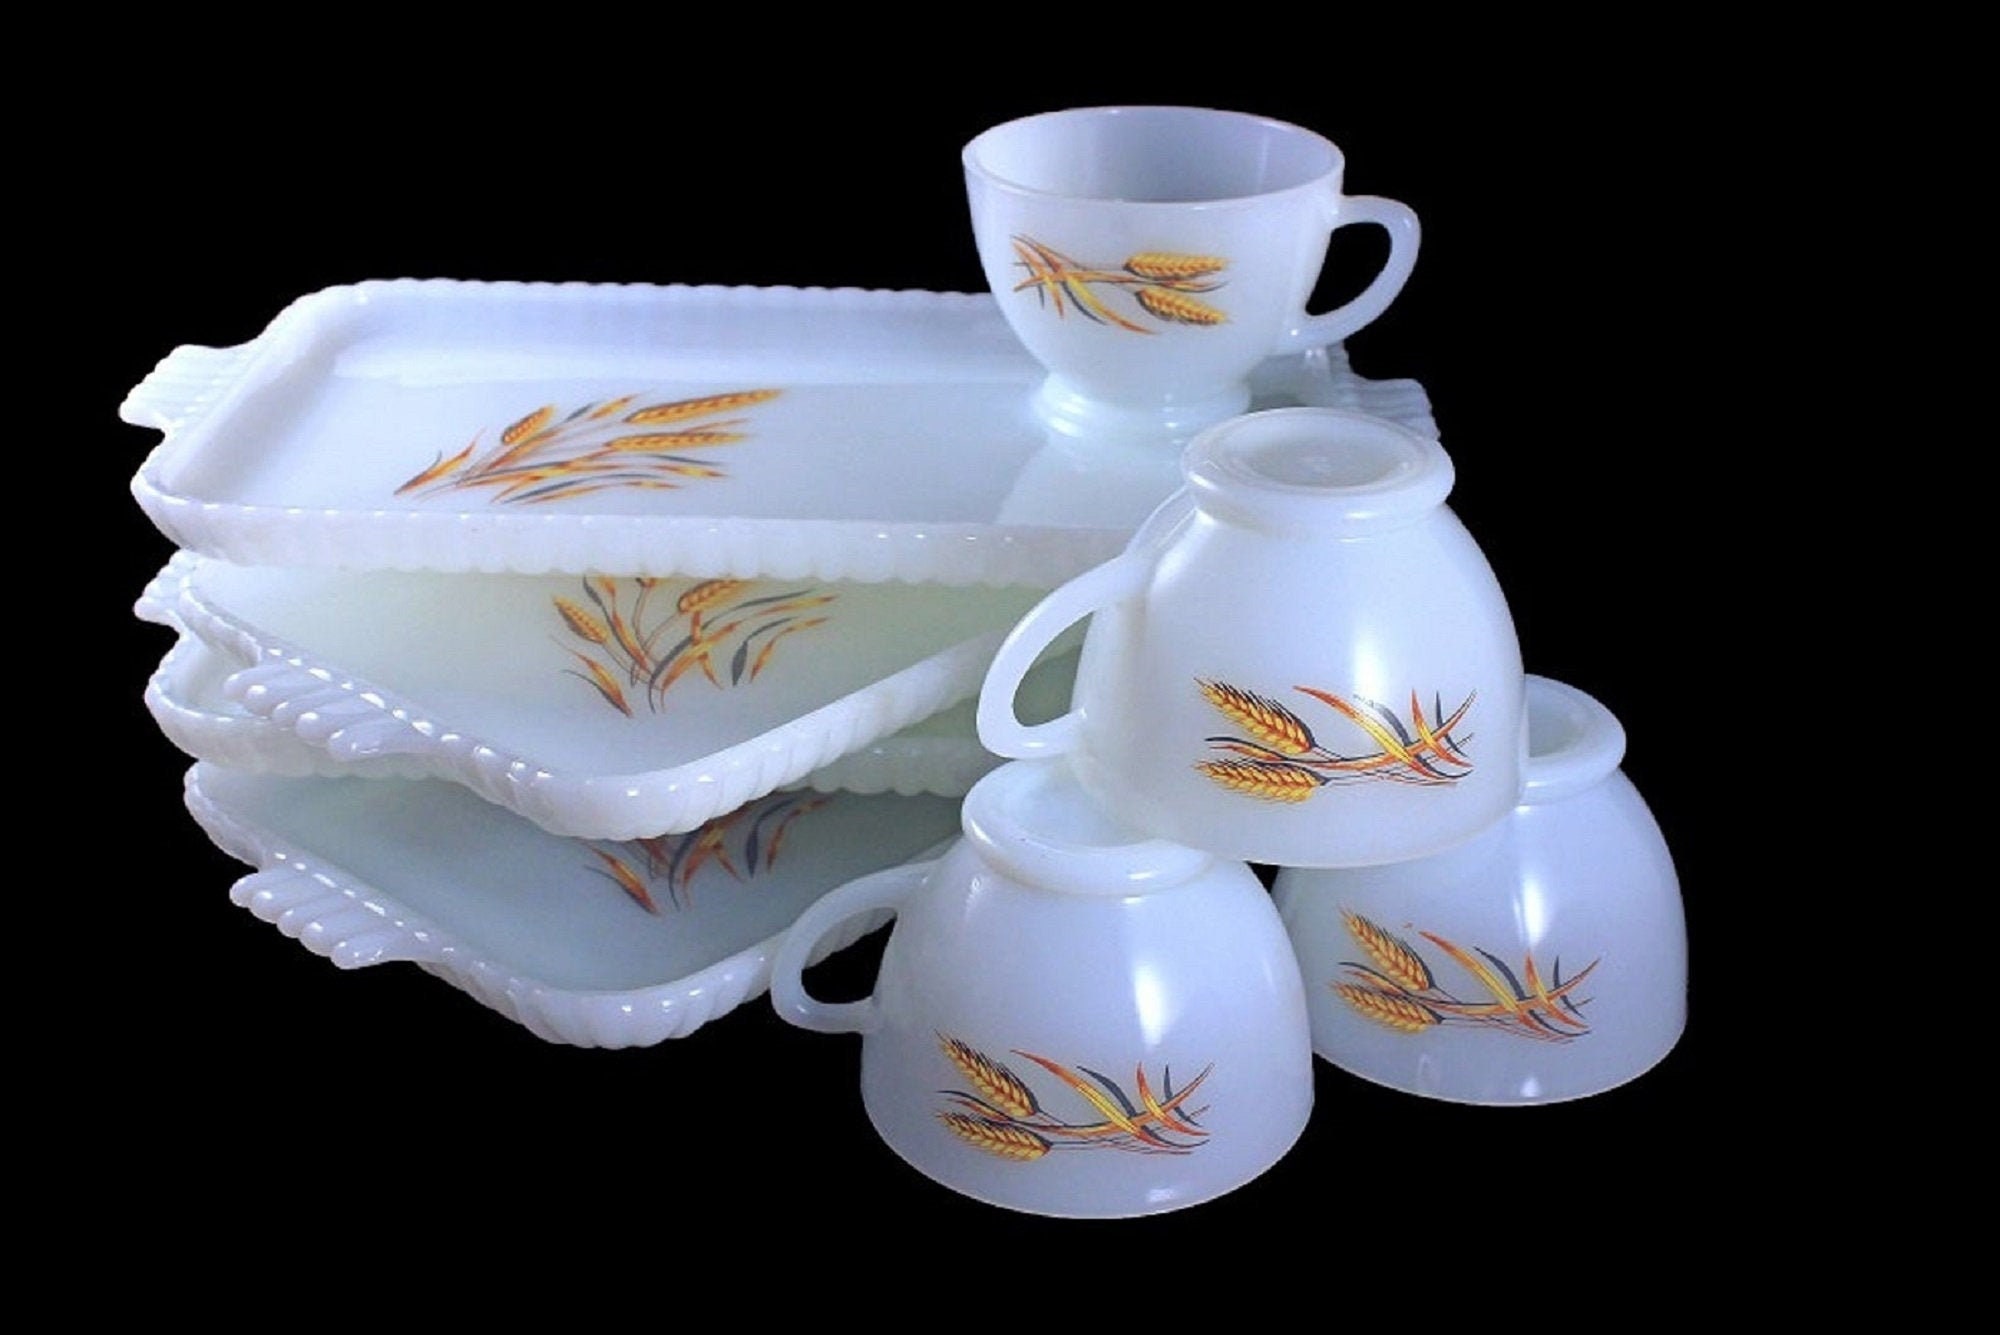 Anchor Hocking Fire King Milk Glass Luncheon Plate and Cup Snack Set.